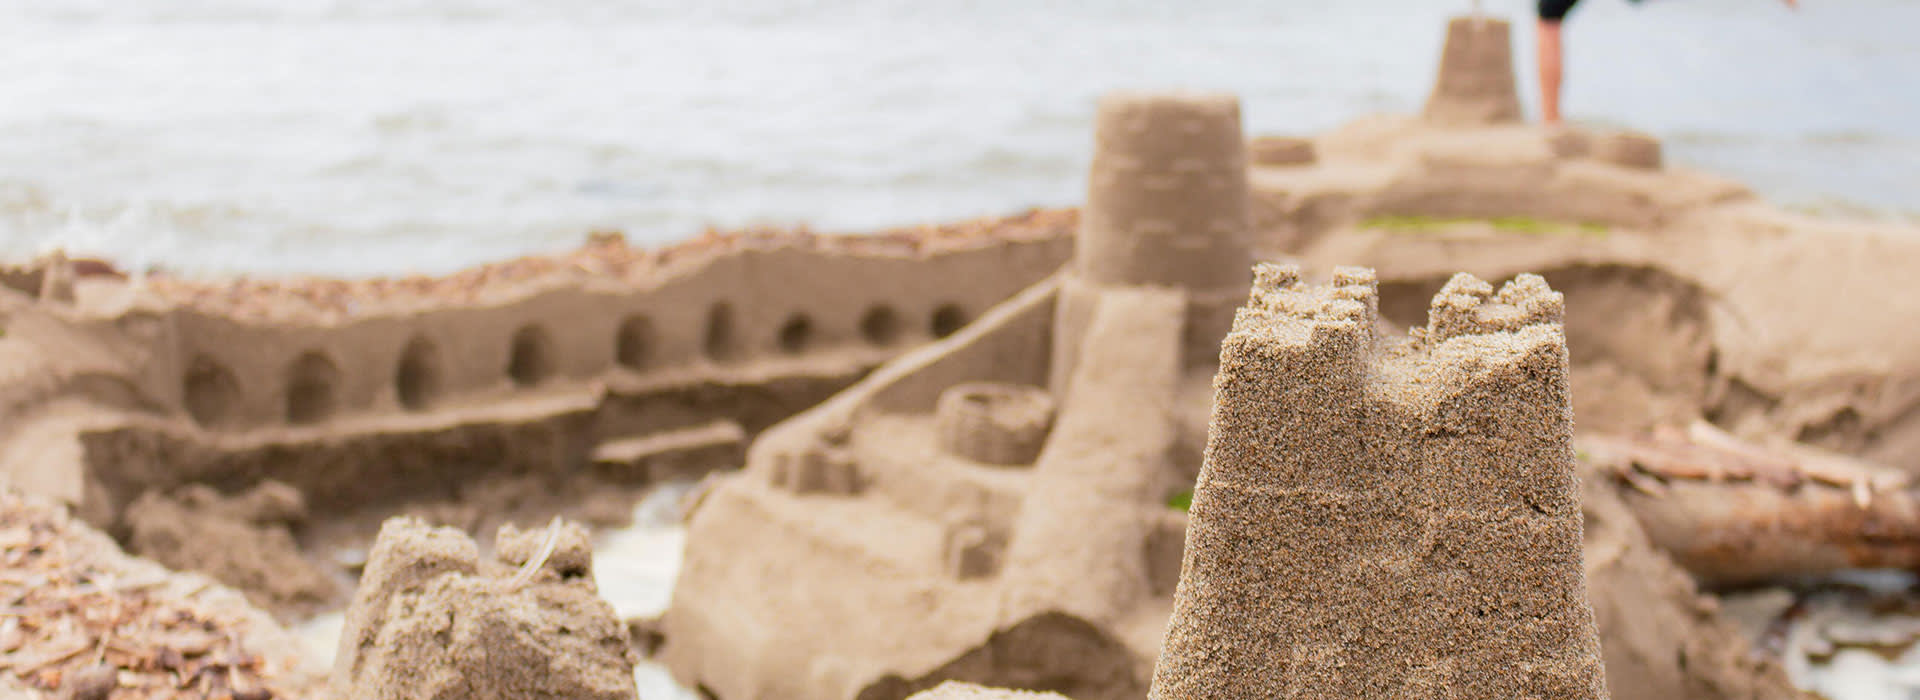 Product Launch Webinar: Sprinklr Sandbox Limitless Innovation Without The Risk